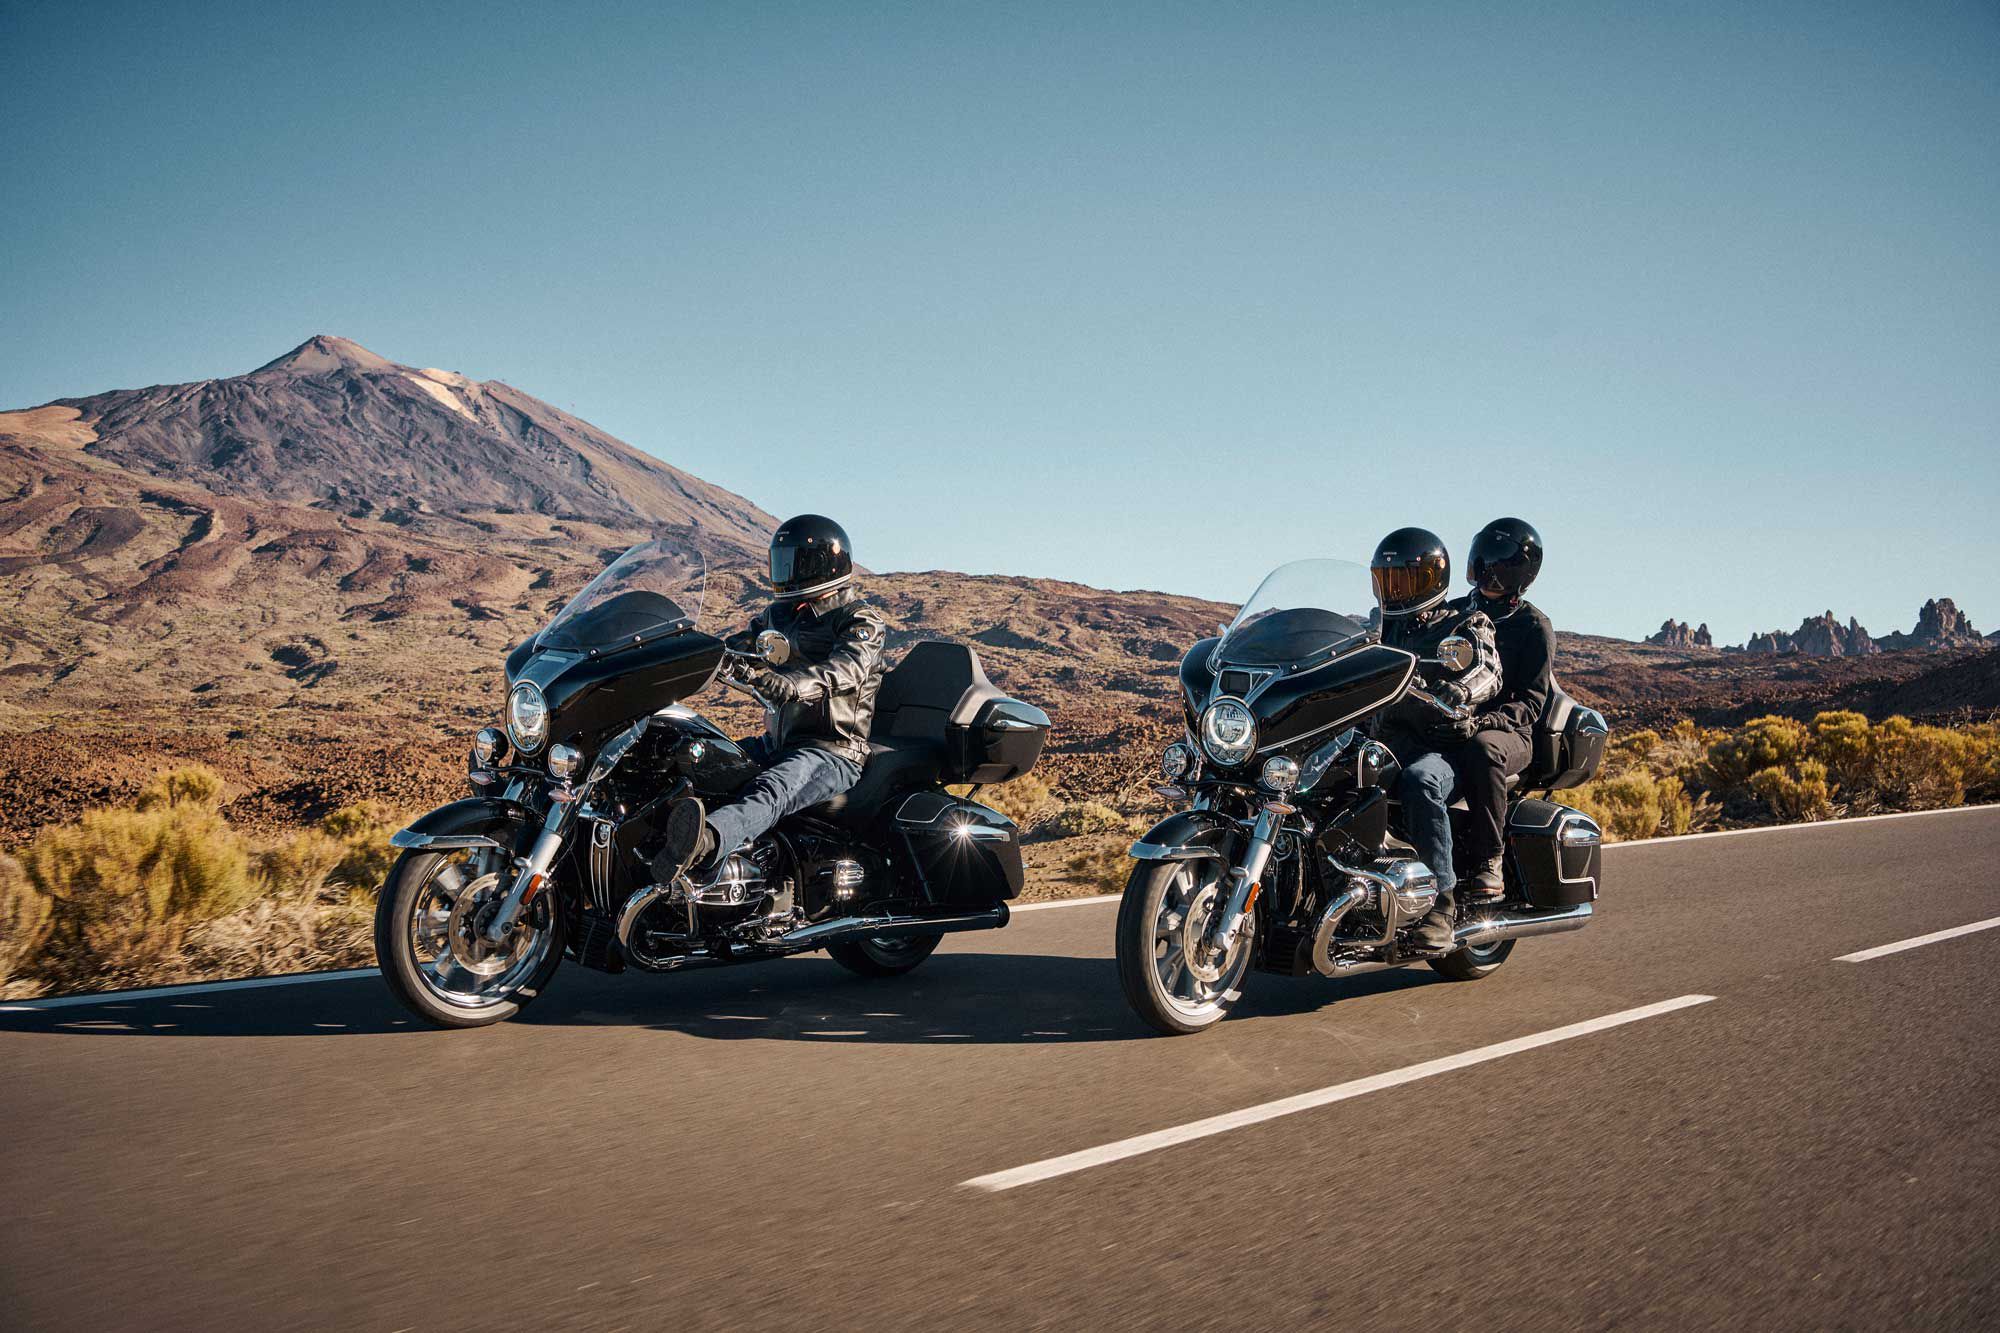 Either two-up or solo, the R 18 Transcontinental promises to be a comfortable and capable touring rig.